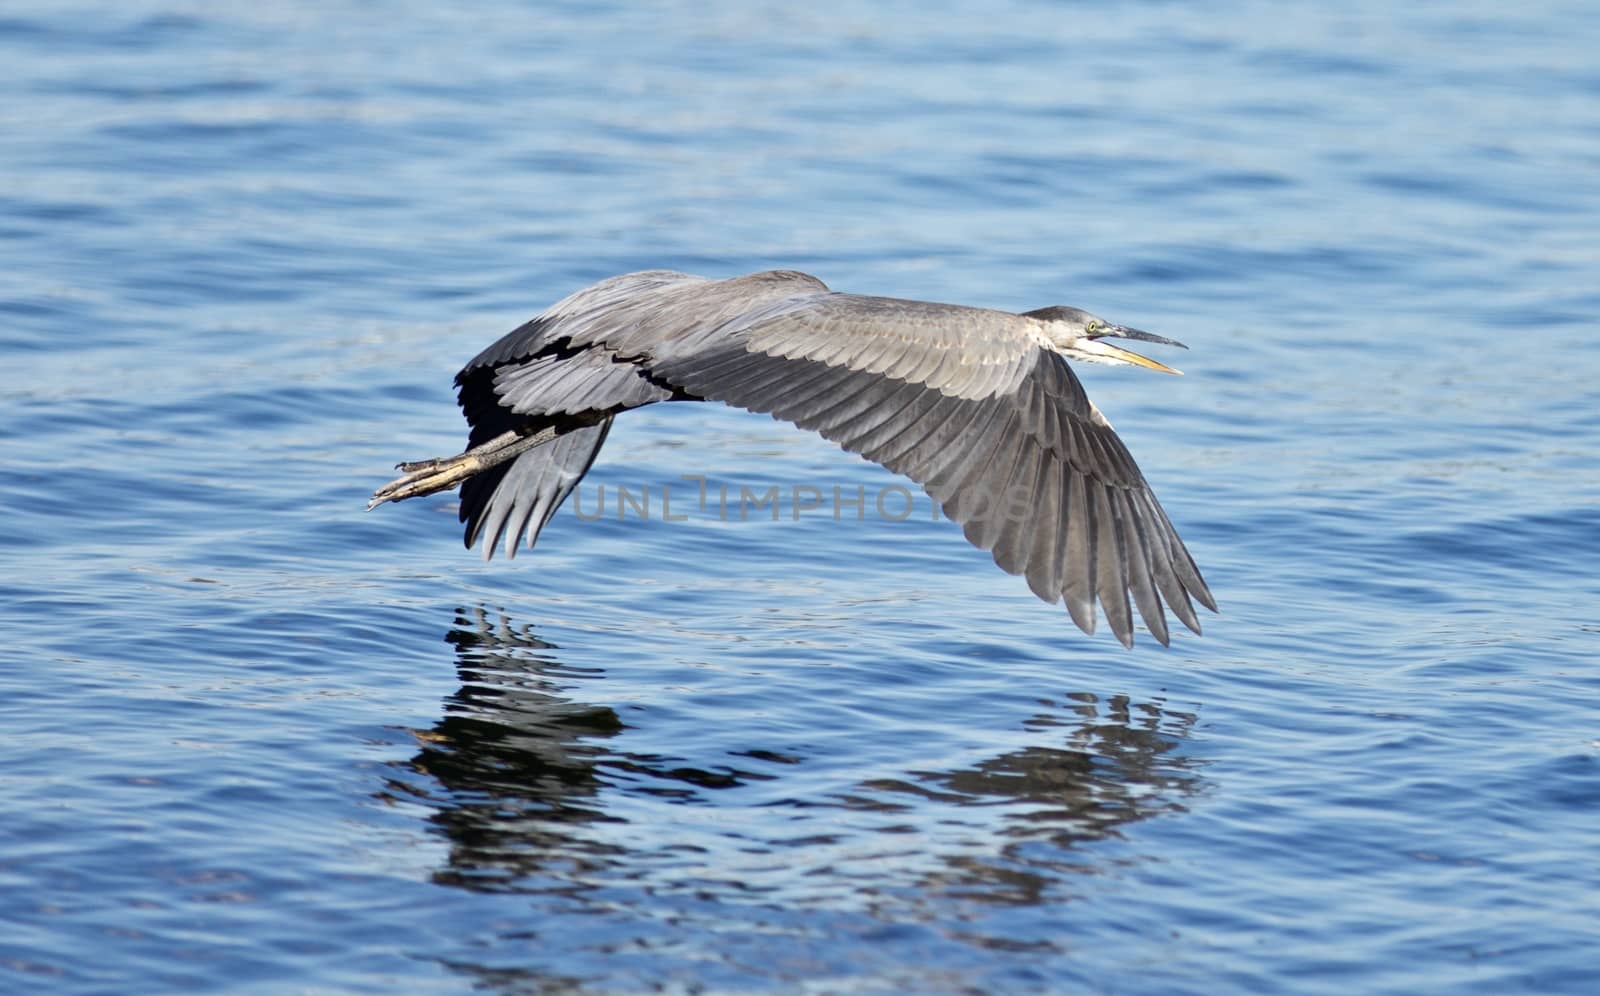 Beautiful isolated picture with a funny great heron flying near the water by teo